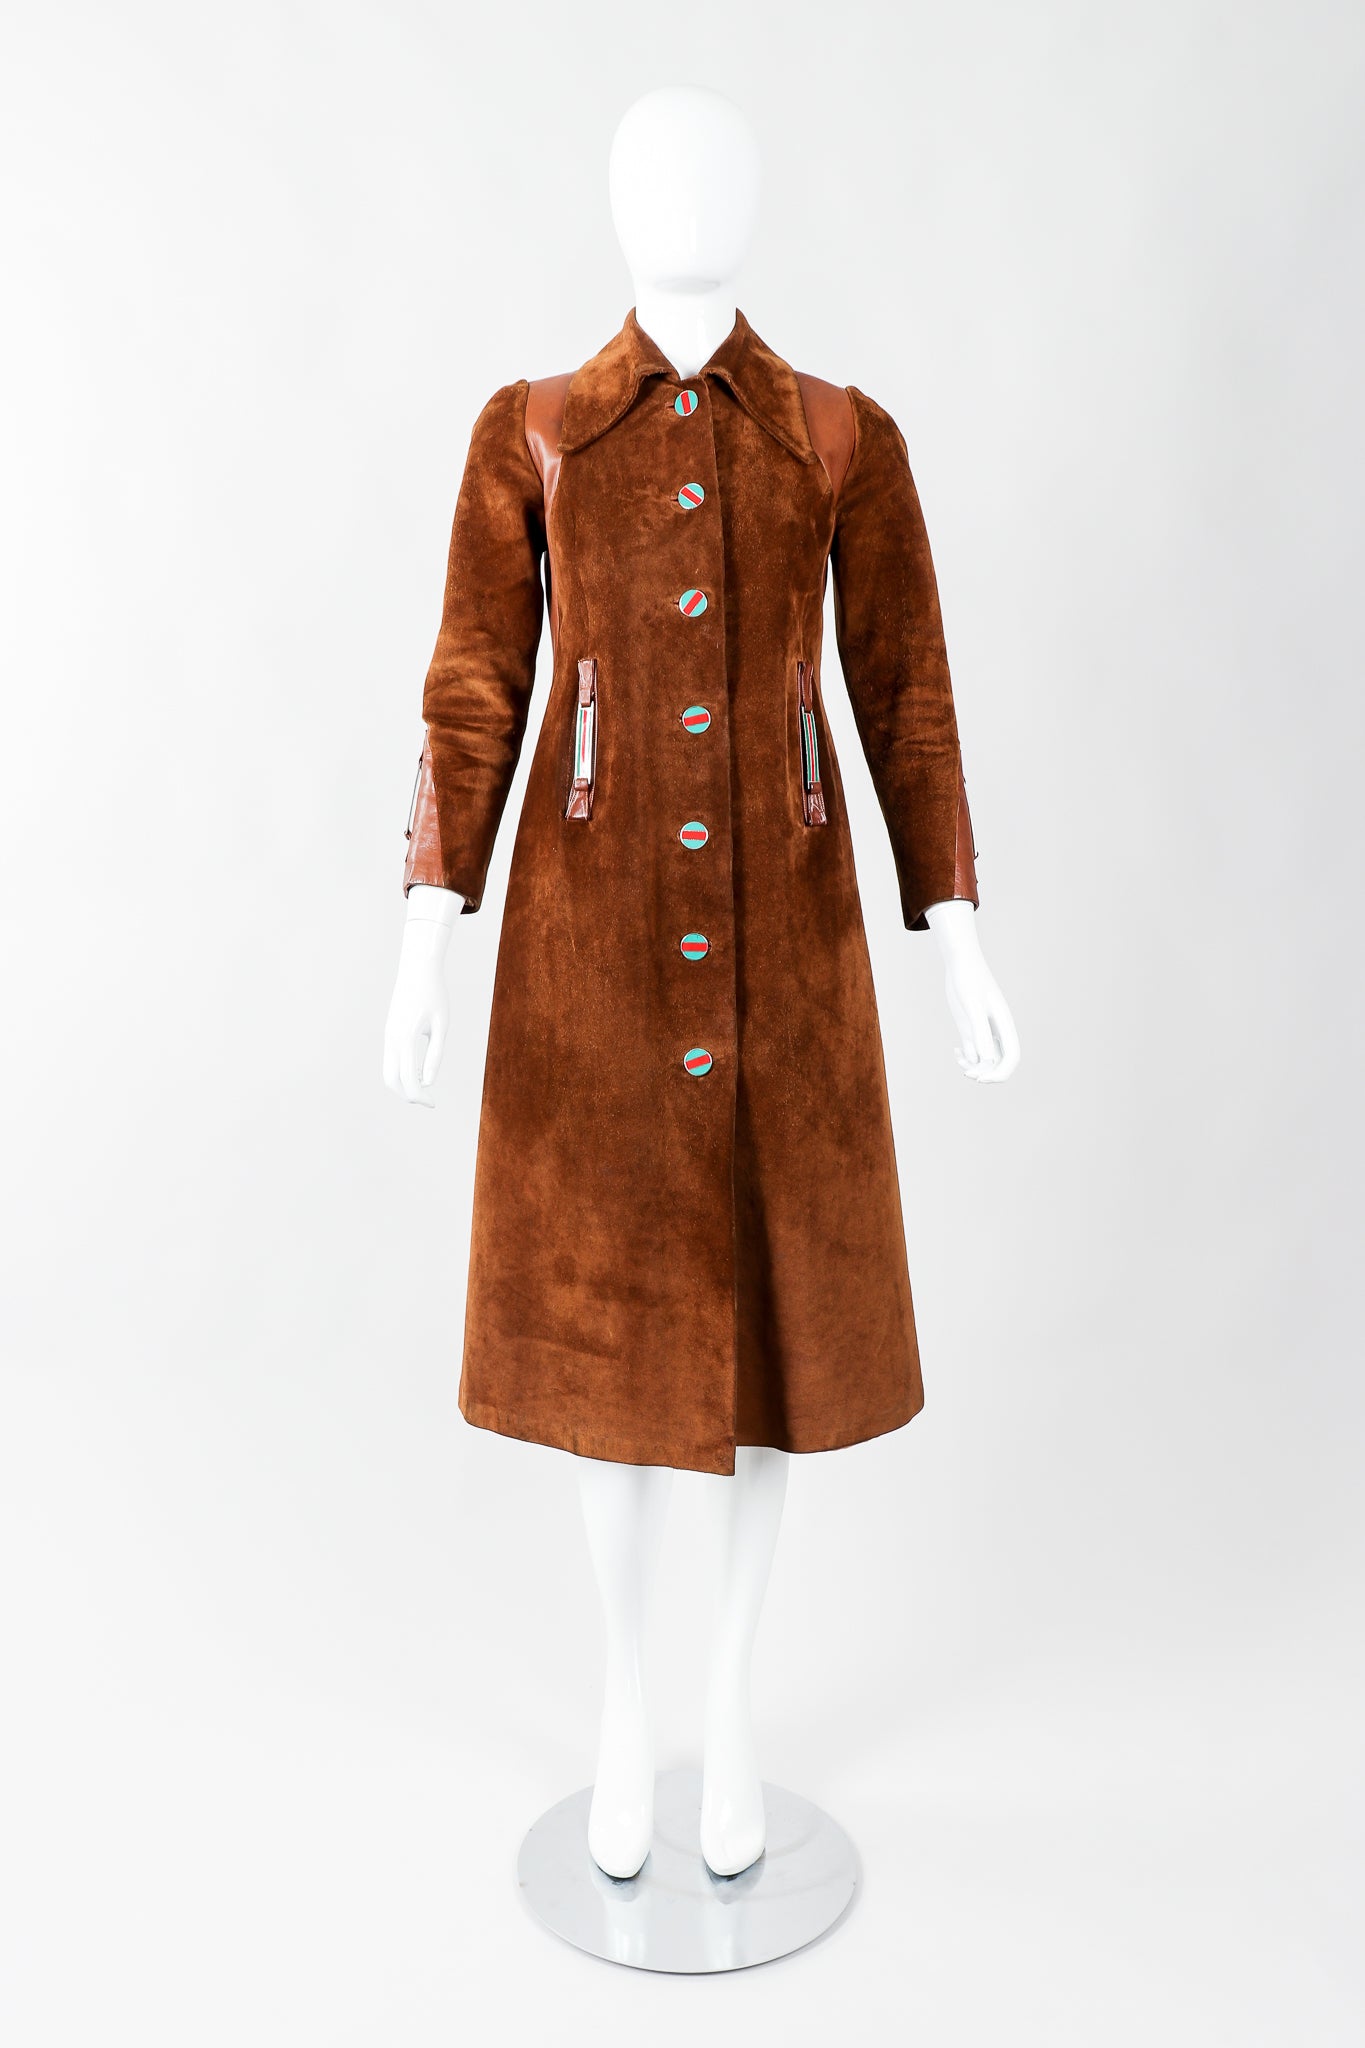 Vintage Gucci 1970s Cognac Suede Iconic Enamel Web Trench Coat on Mannequin full front, at Recess